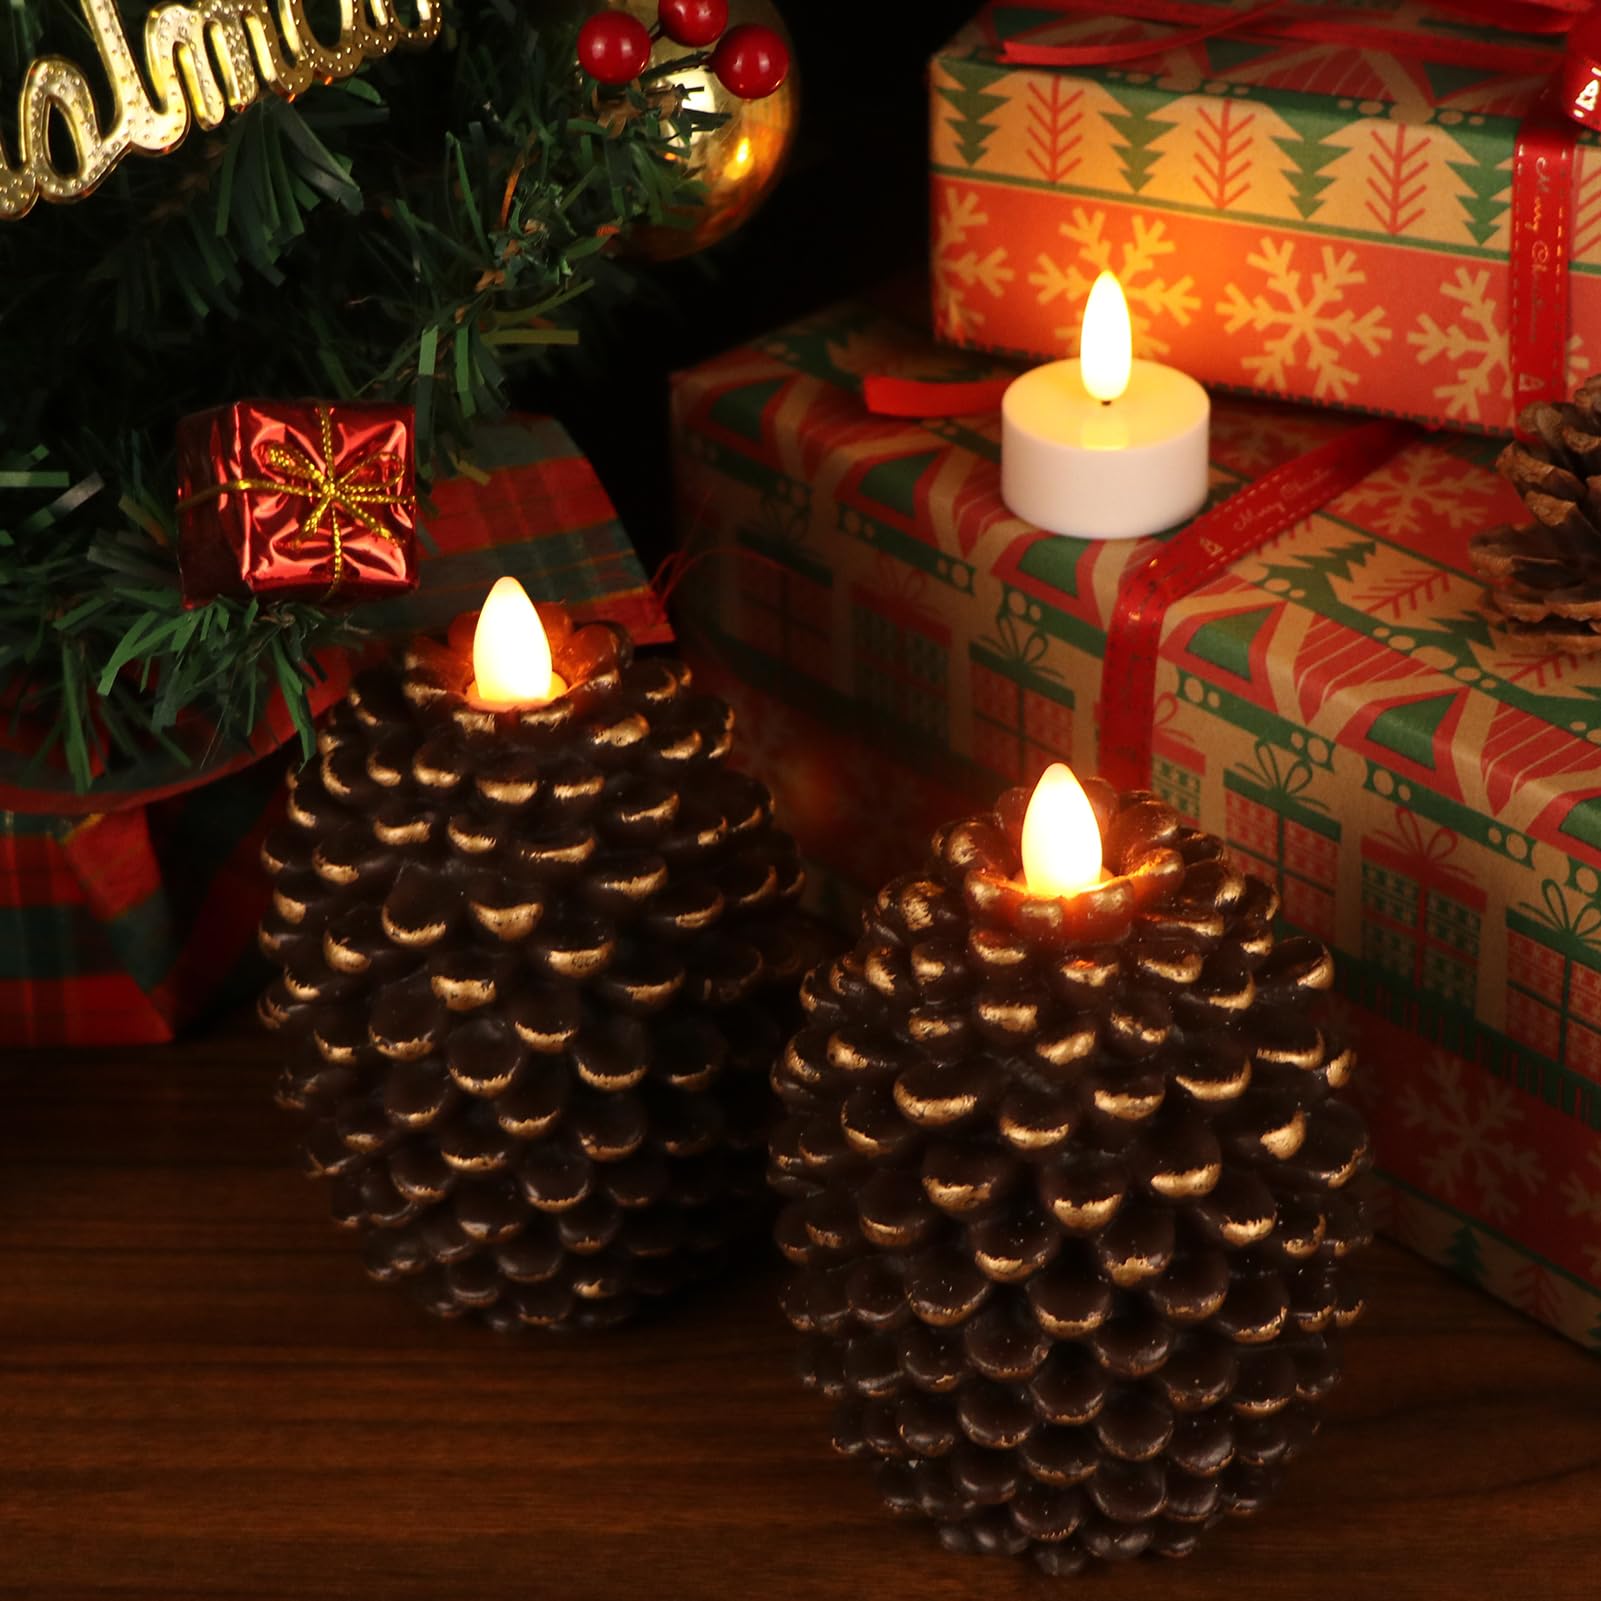 Wondise Flameless Candles with Timer, Battery Operated Flickering Wick Real Wax Pine Cone Candles for Holiday Indoor Decoration, Set of 2, Brown(D3.5 x H4.7 Inch)